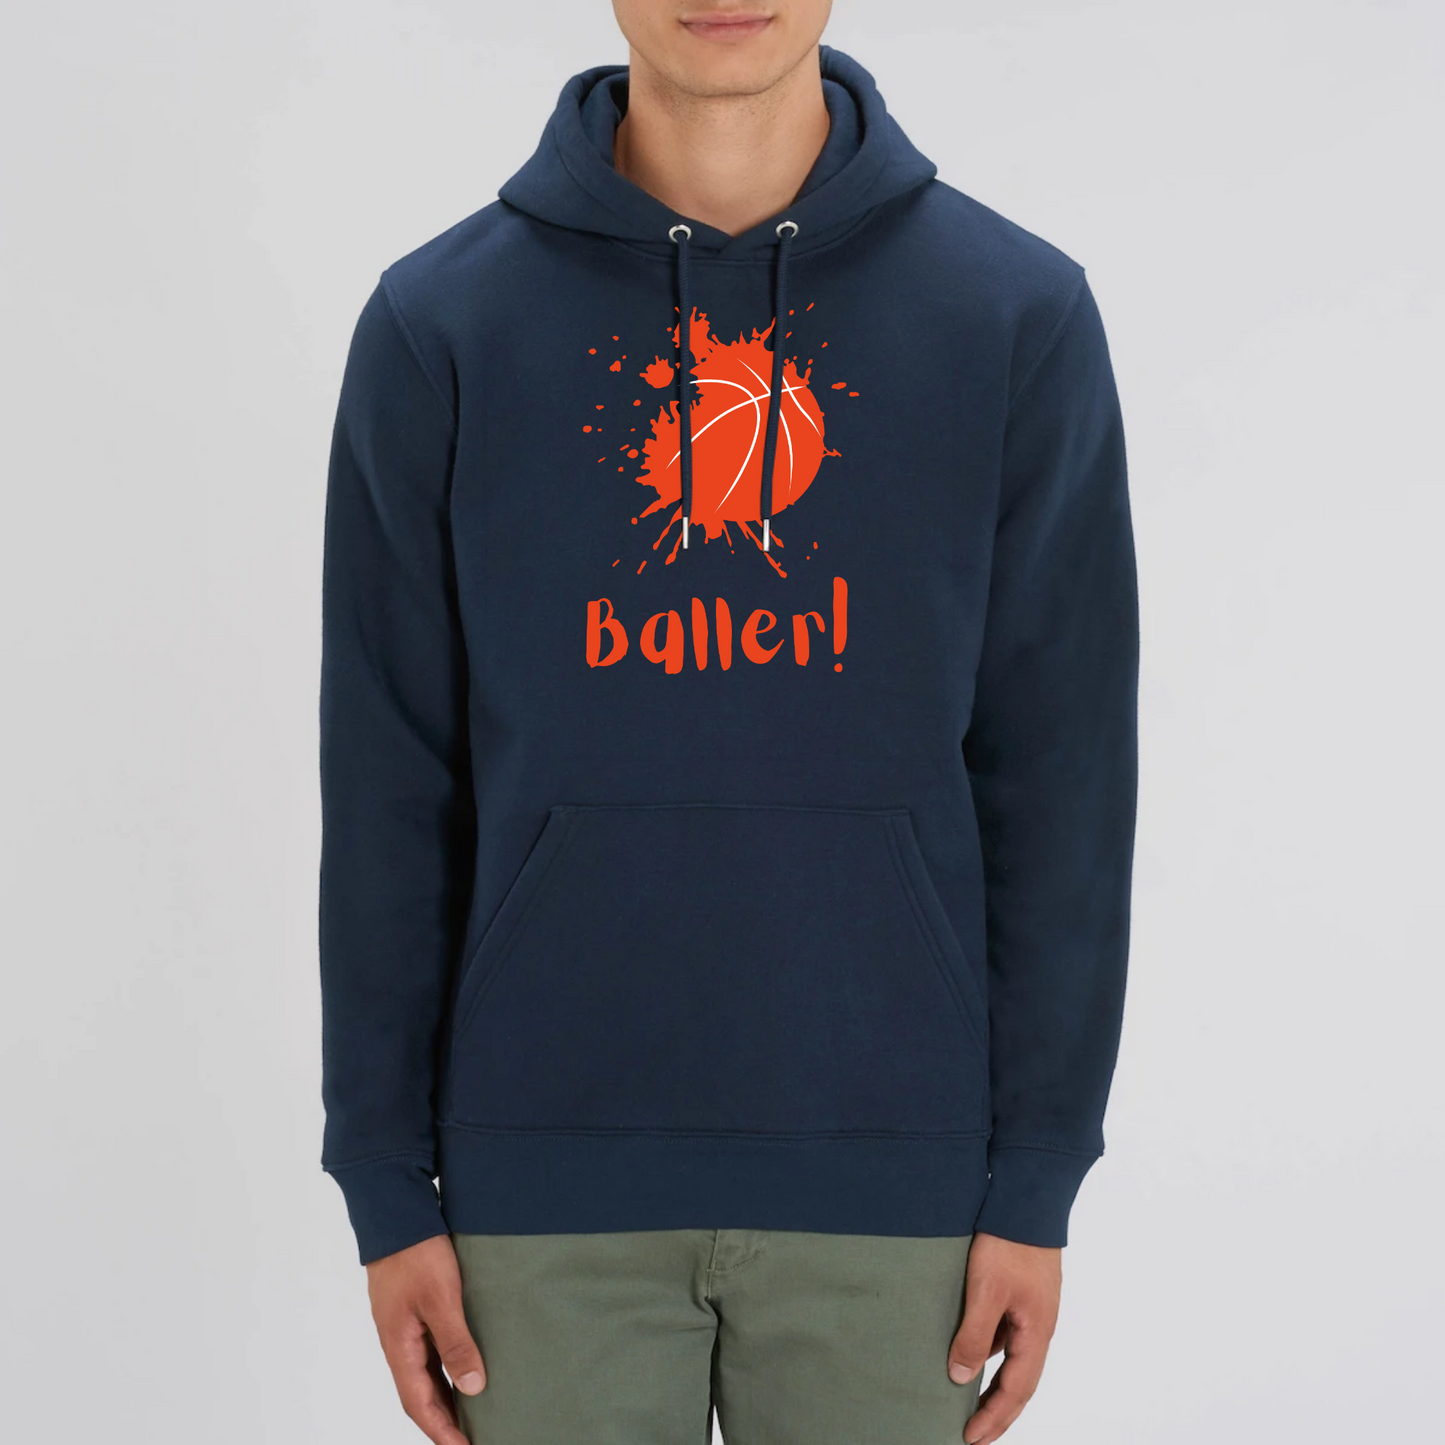 Baller Unisex Organic Hoodie - Designed by T-Pop Available to Buy at a Discounted Price on Moon Behind The Hill Online Designer Discount Store